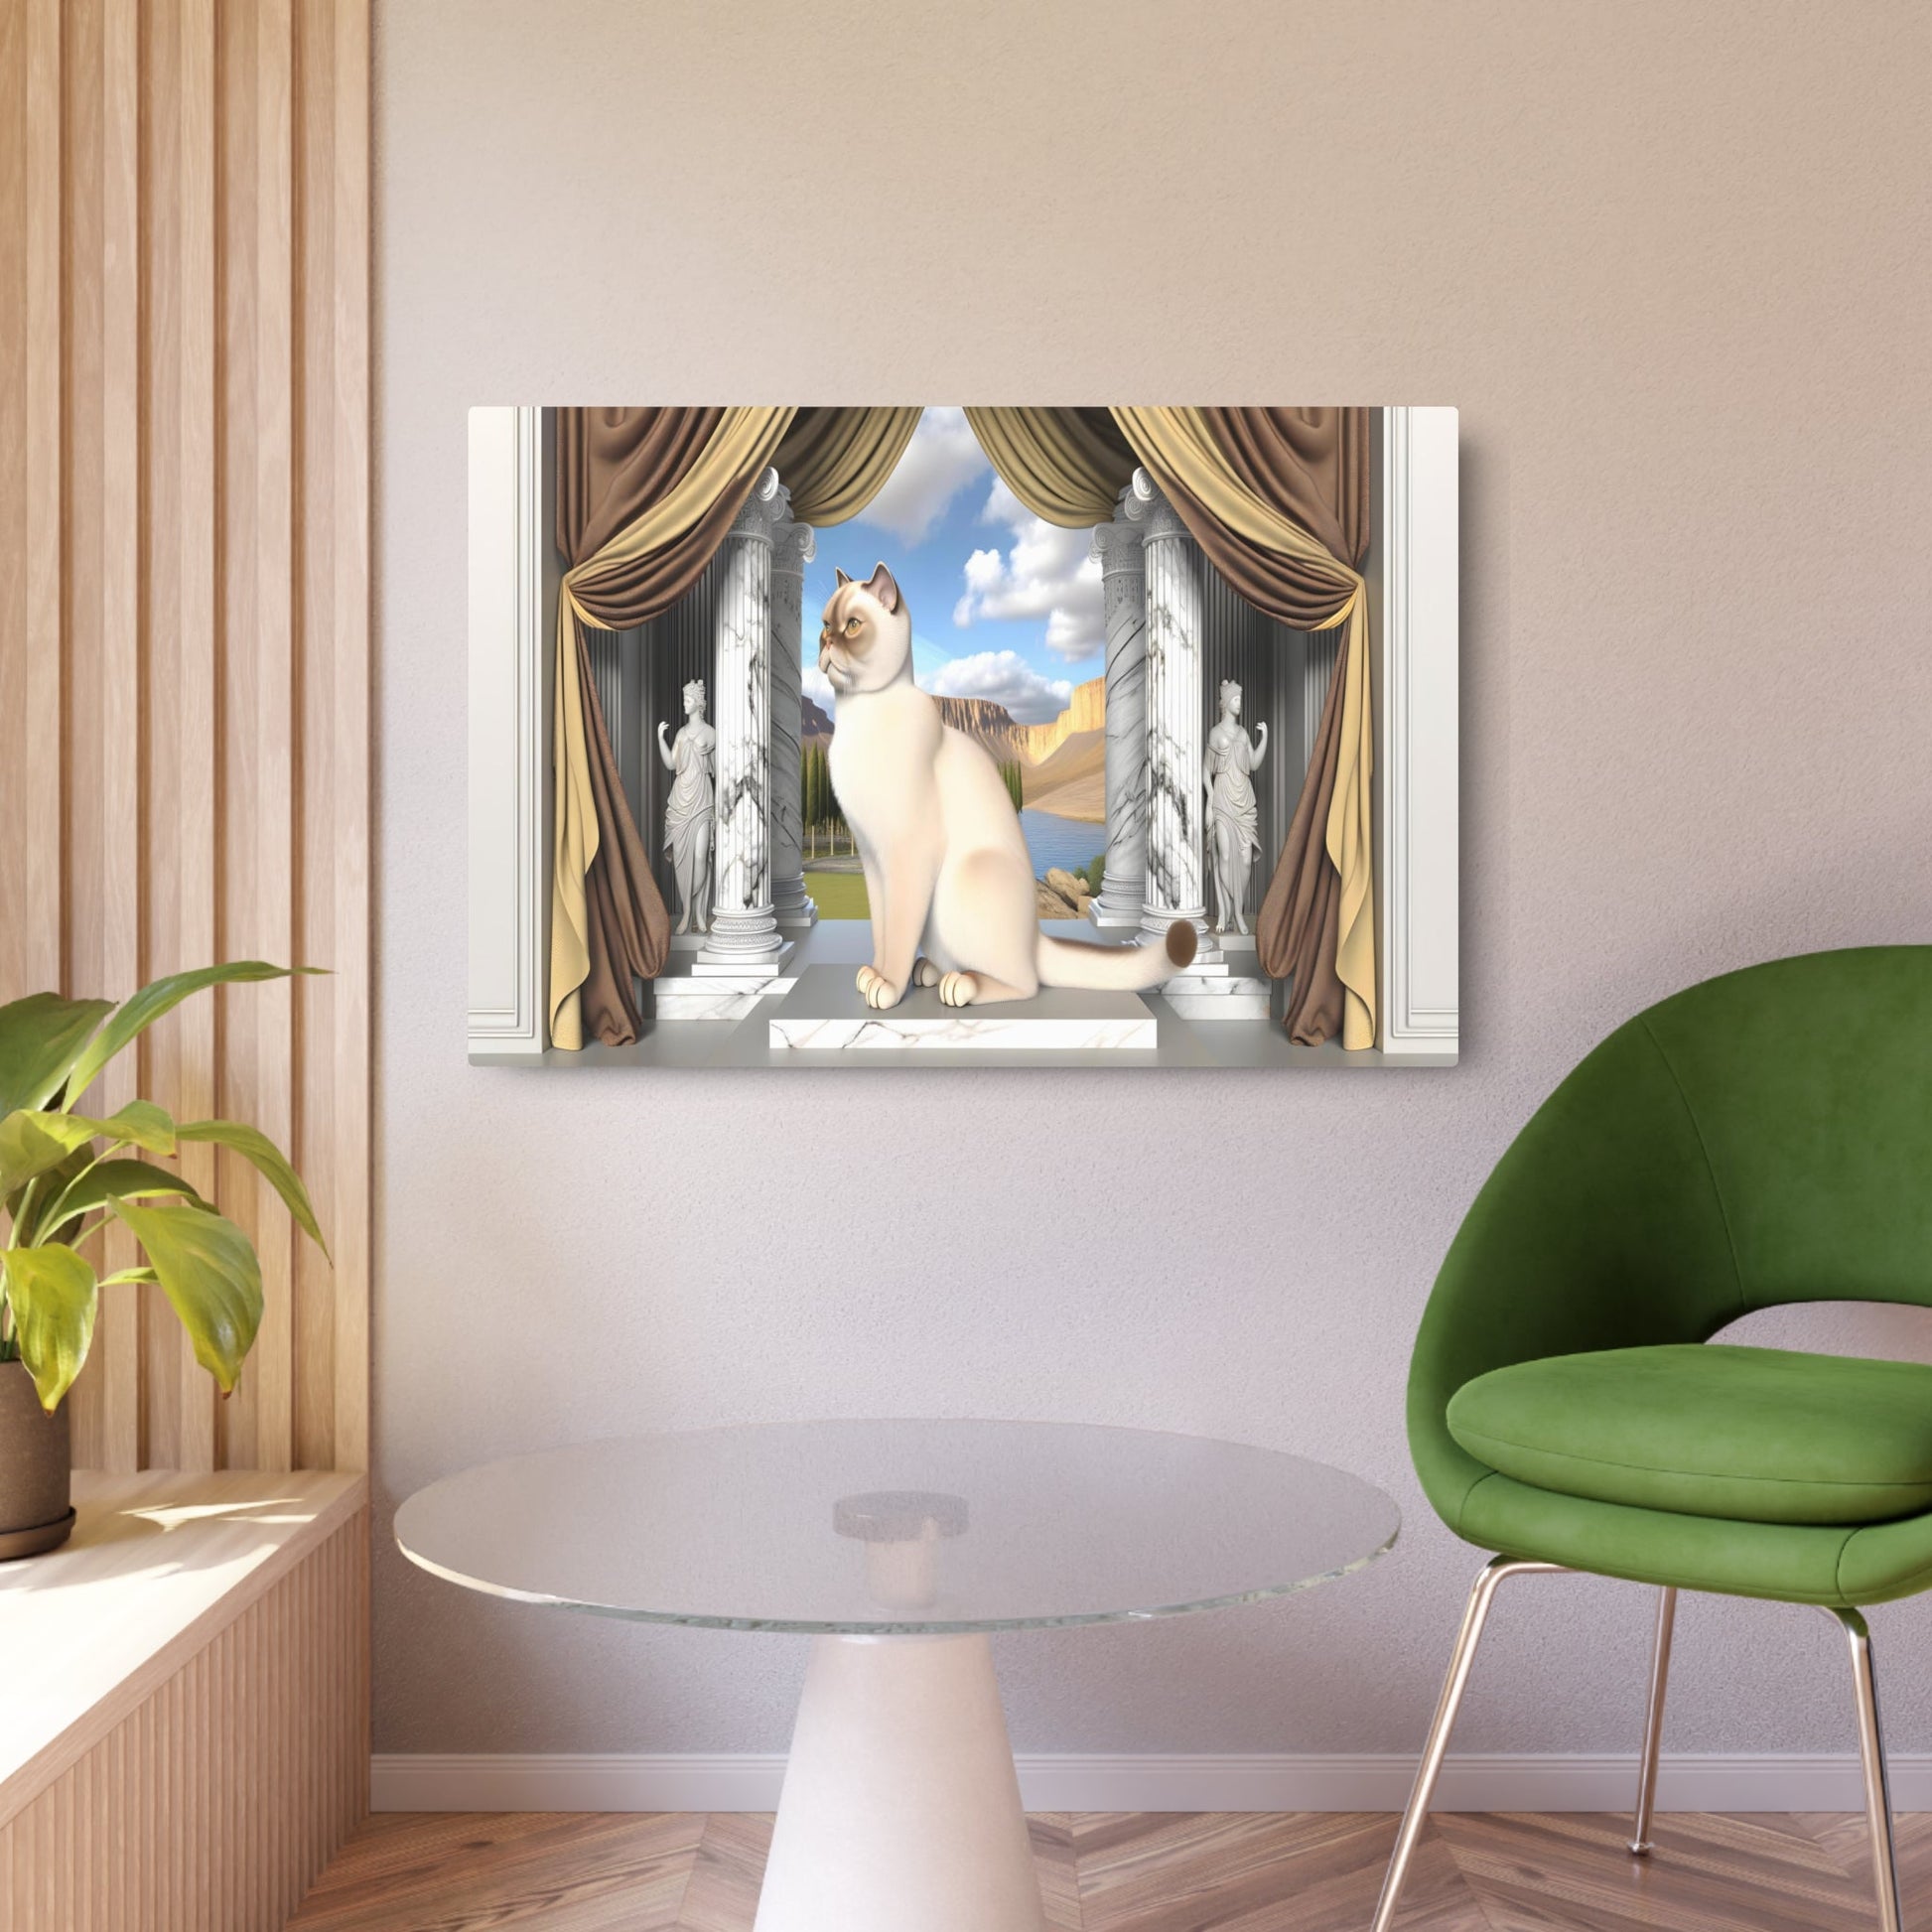 Metal Poster Art | "Neoclassical Aristocratic Cat Art Print - Western Neoclassicism Art Style Featuring Regal Feline with Marble Columns and Classic Drap - Metal Poster Art 36″ x 24″ (Horizontal) 0.12''